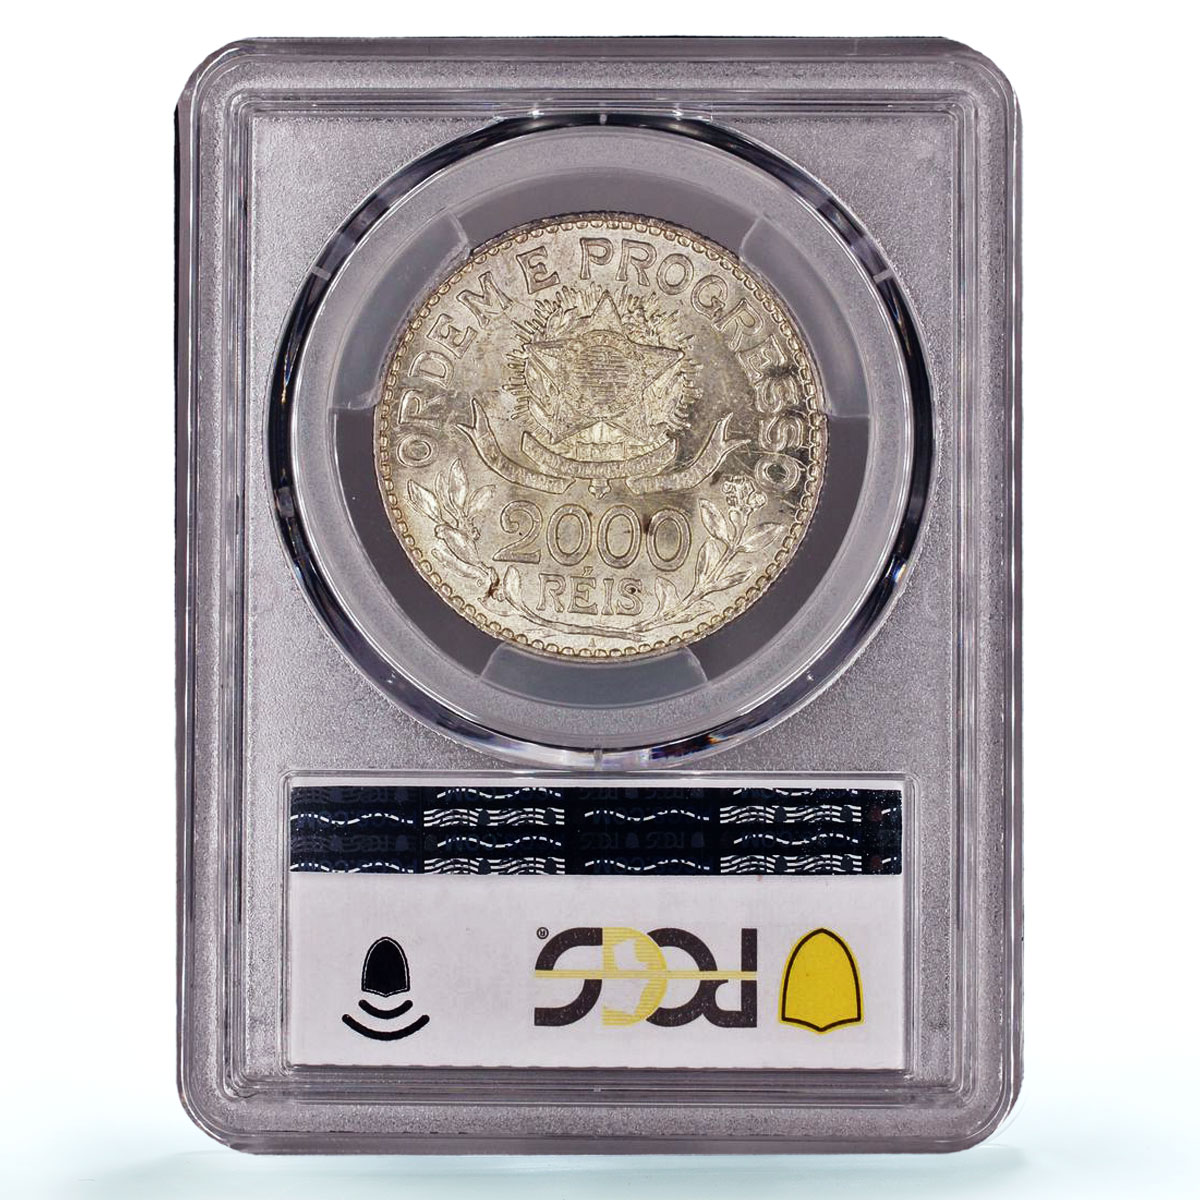 Brazil 2000 reis Regular Coinage Liberty Head KM-514 MS64 PCGS silver coin 1913